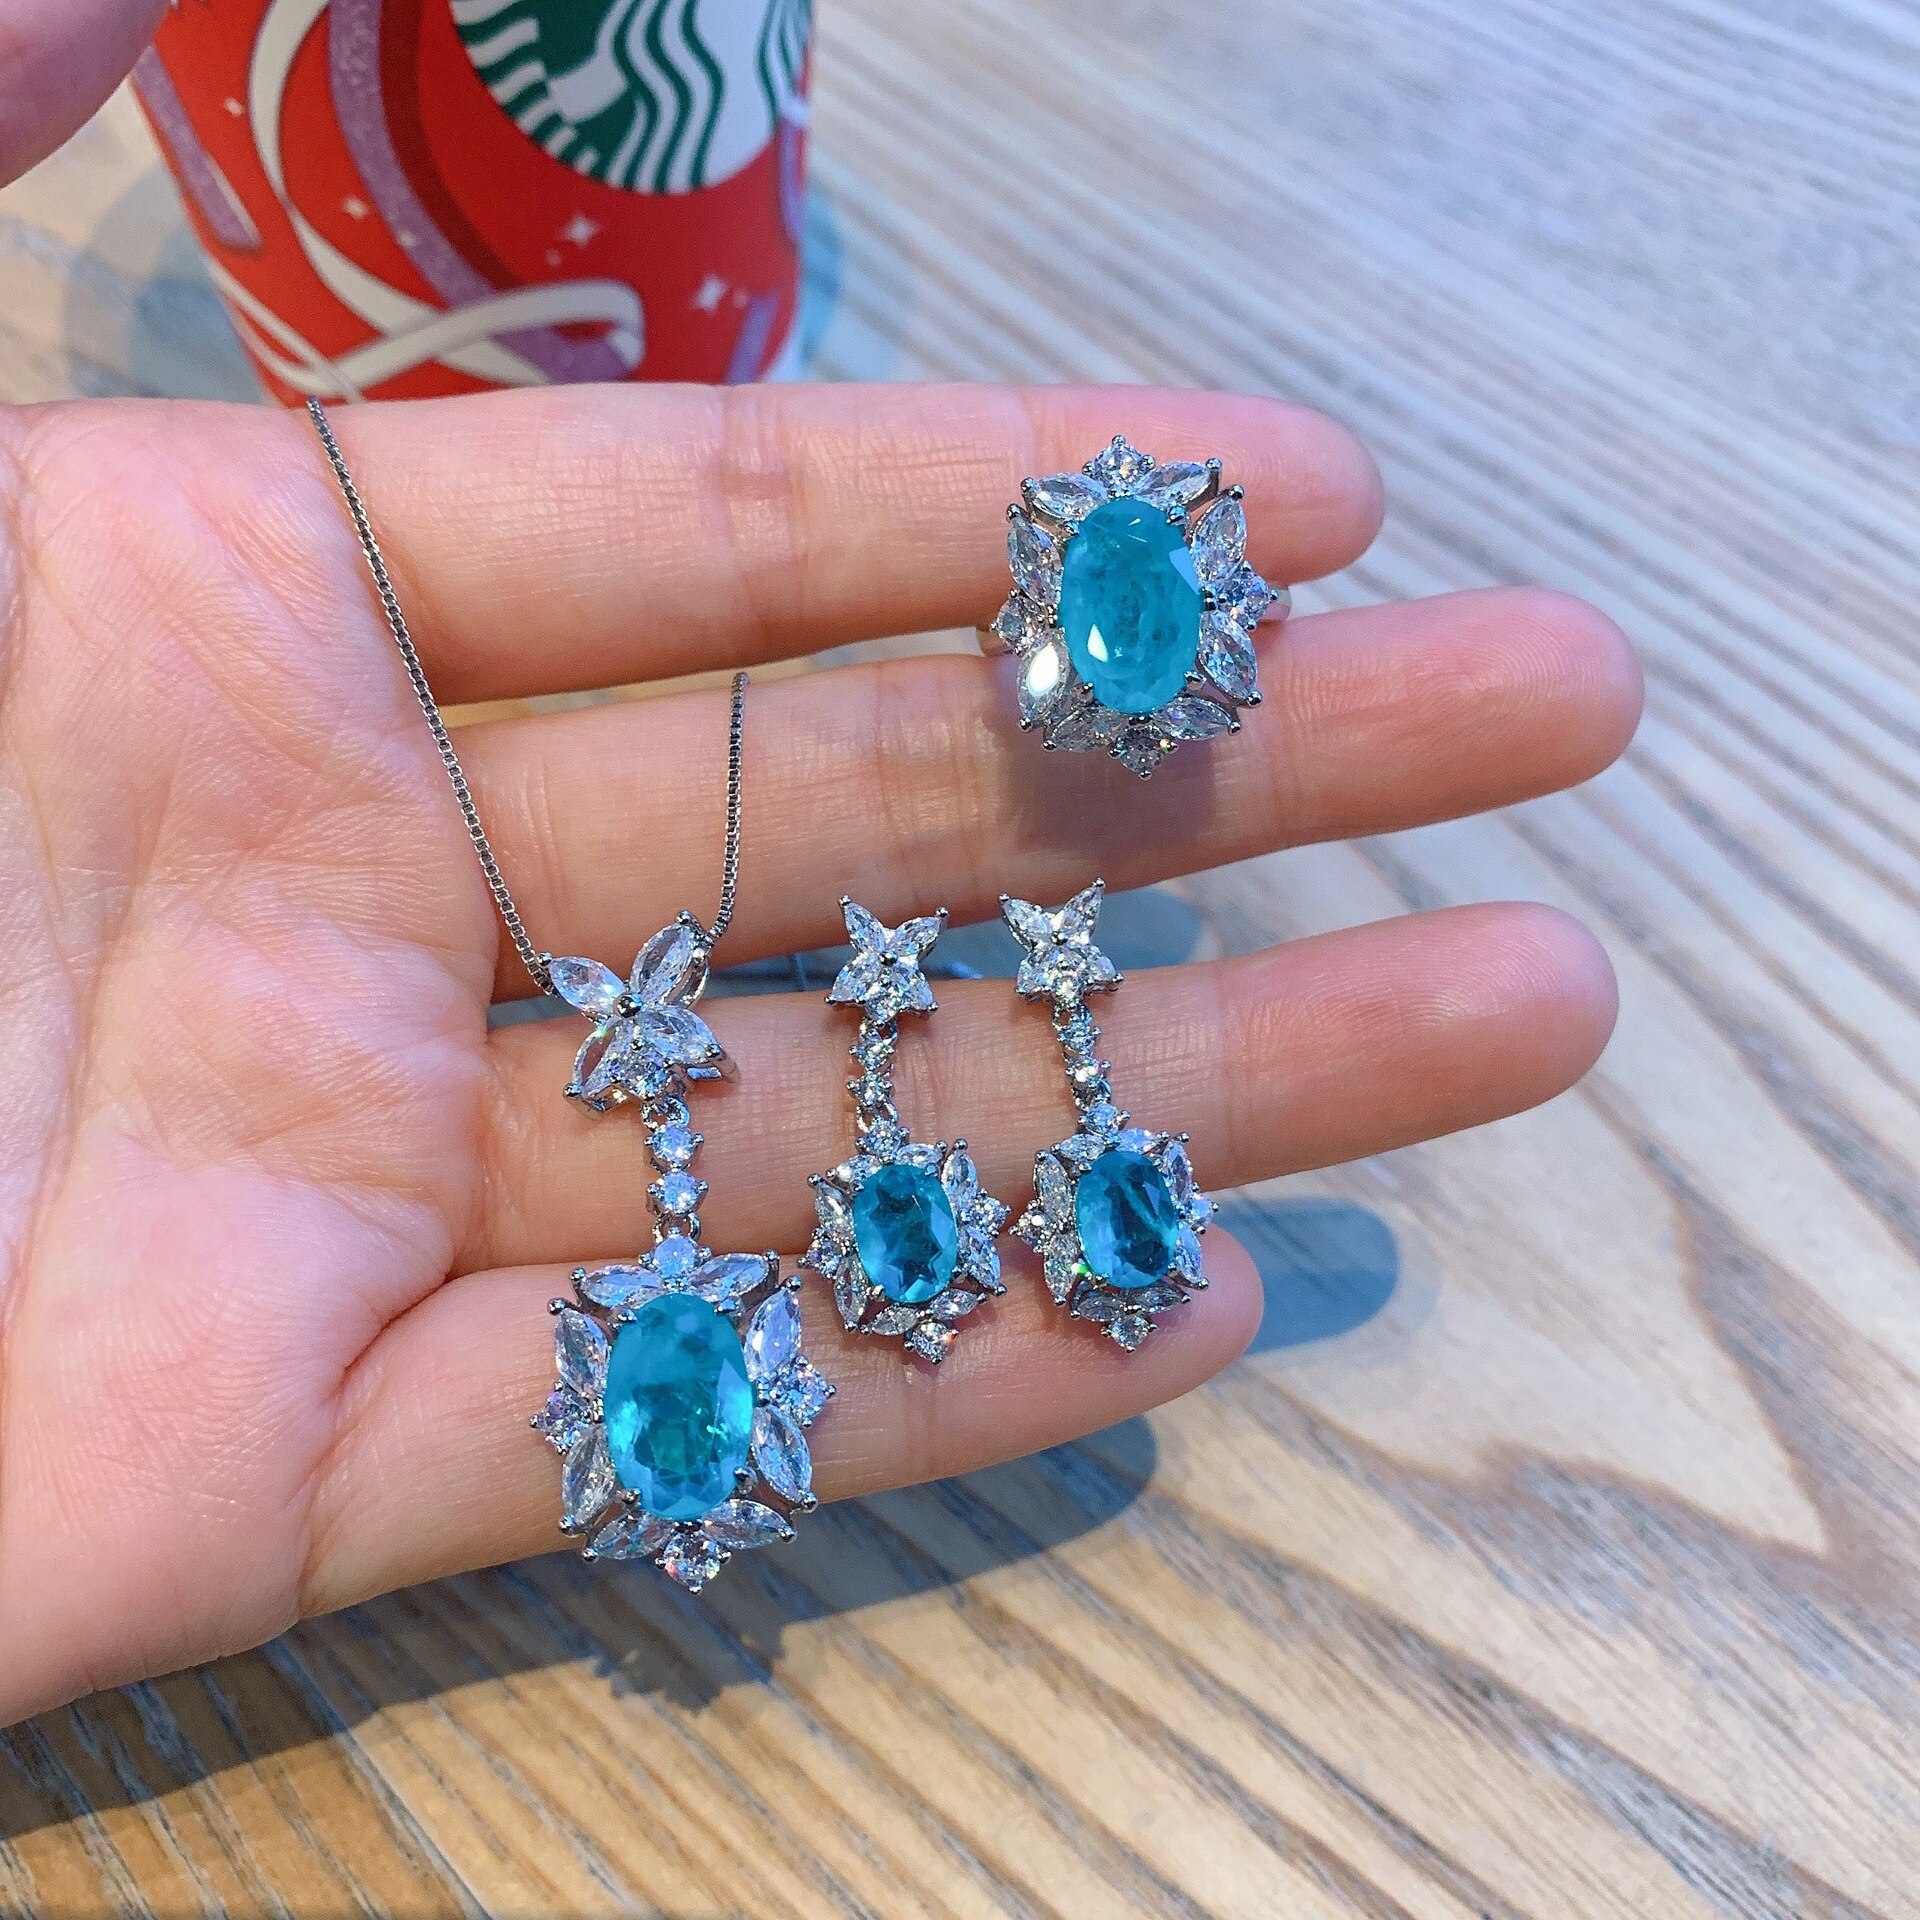 Luxurious-925-Sterling-Silver-Paraiba-Crystal-Exquisite-Small-Earrings-Pendant-Ring-Necklace-Teen-Girls-Aretes-Aesthetic.jpg